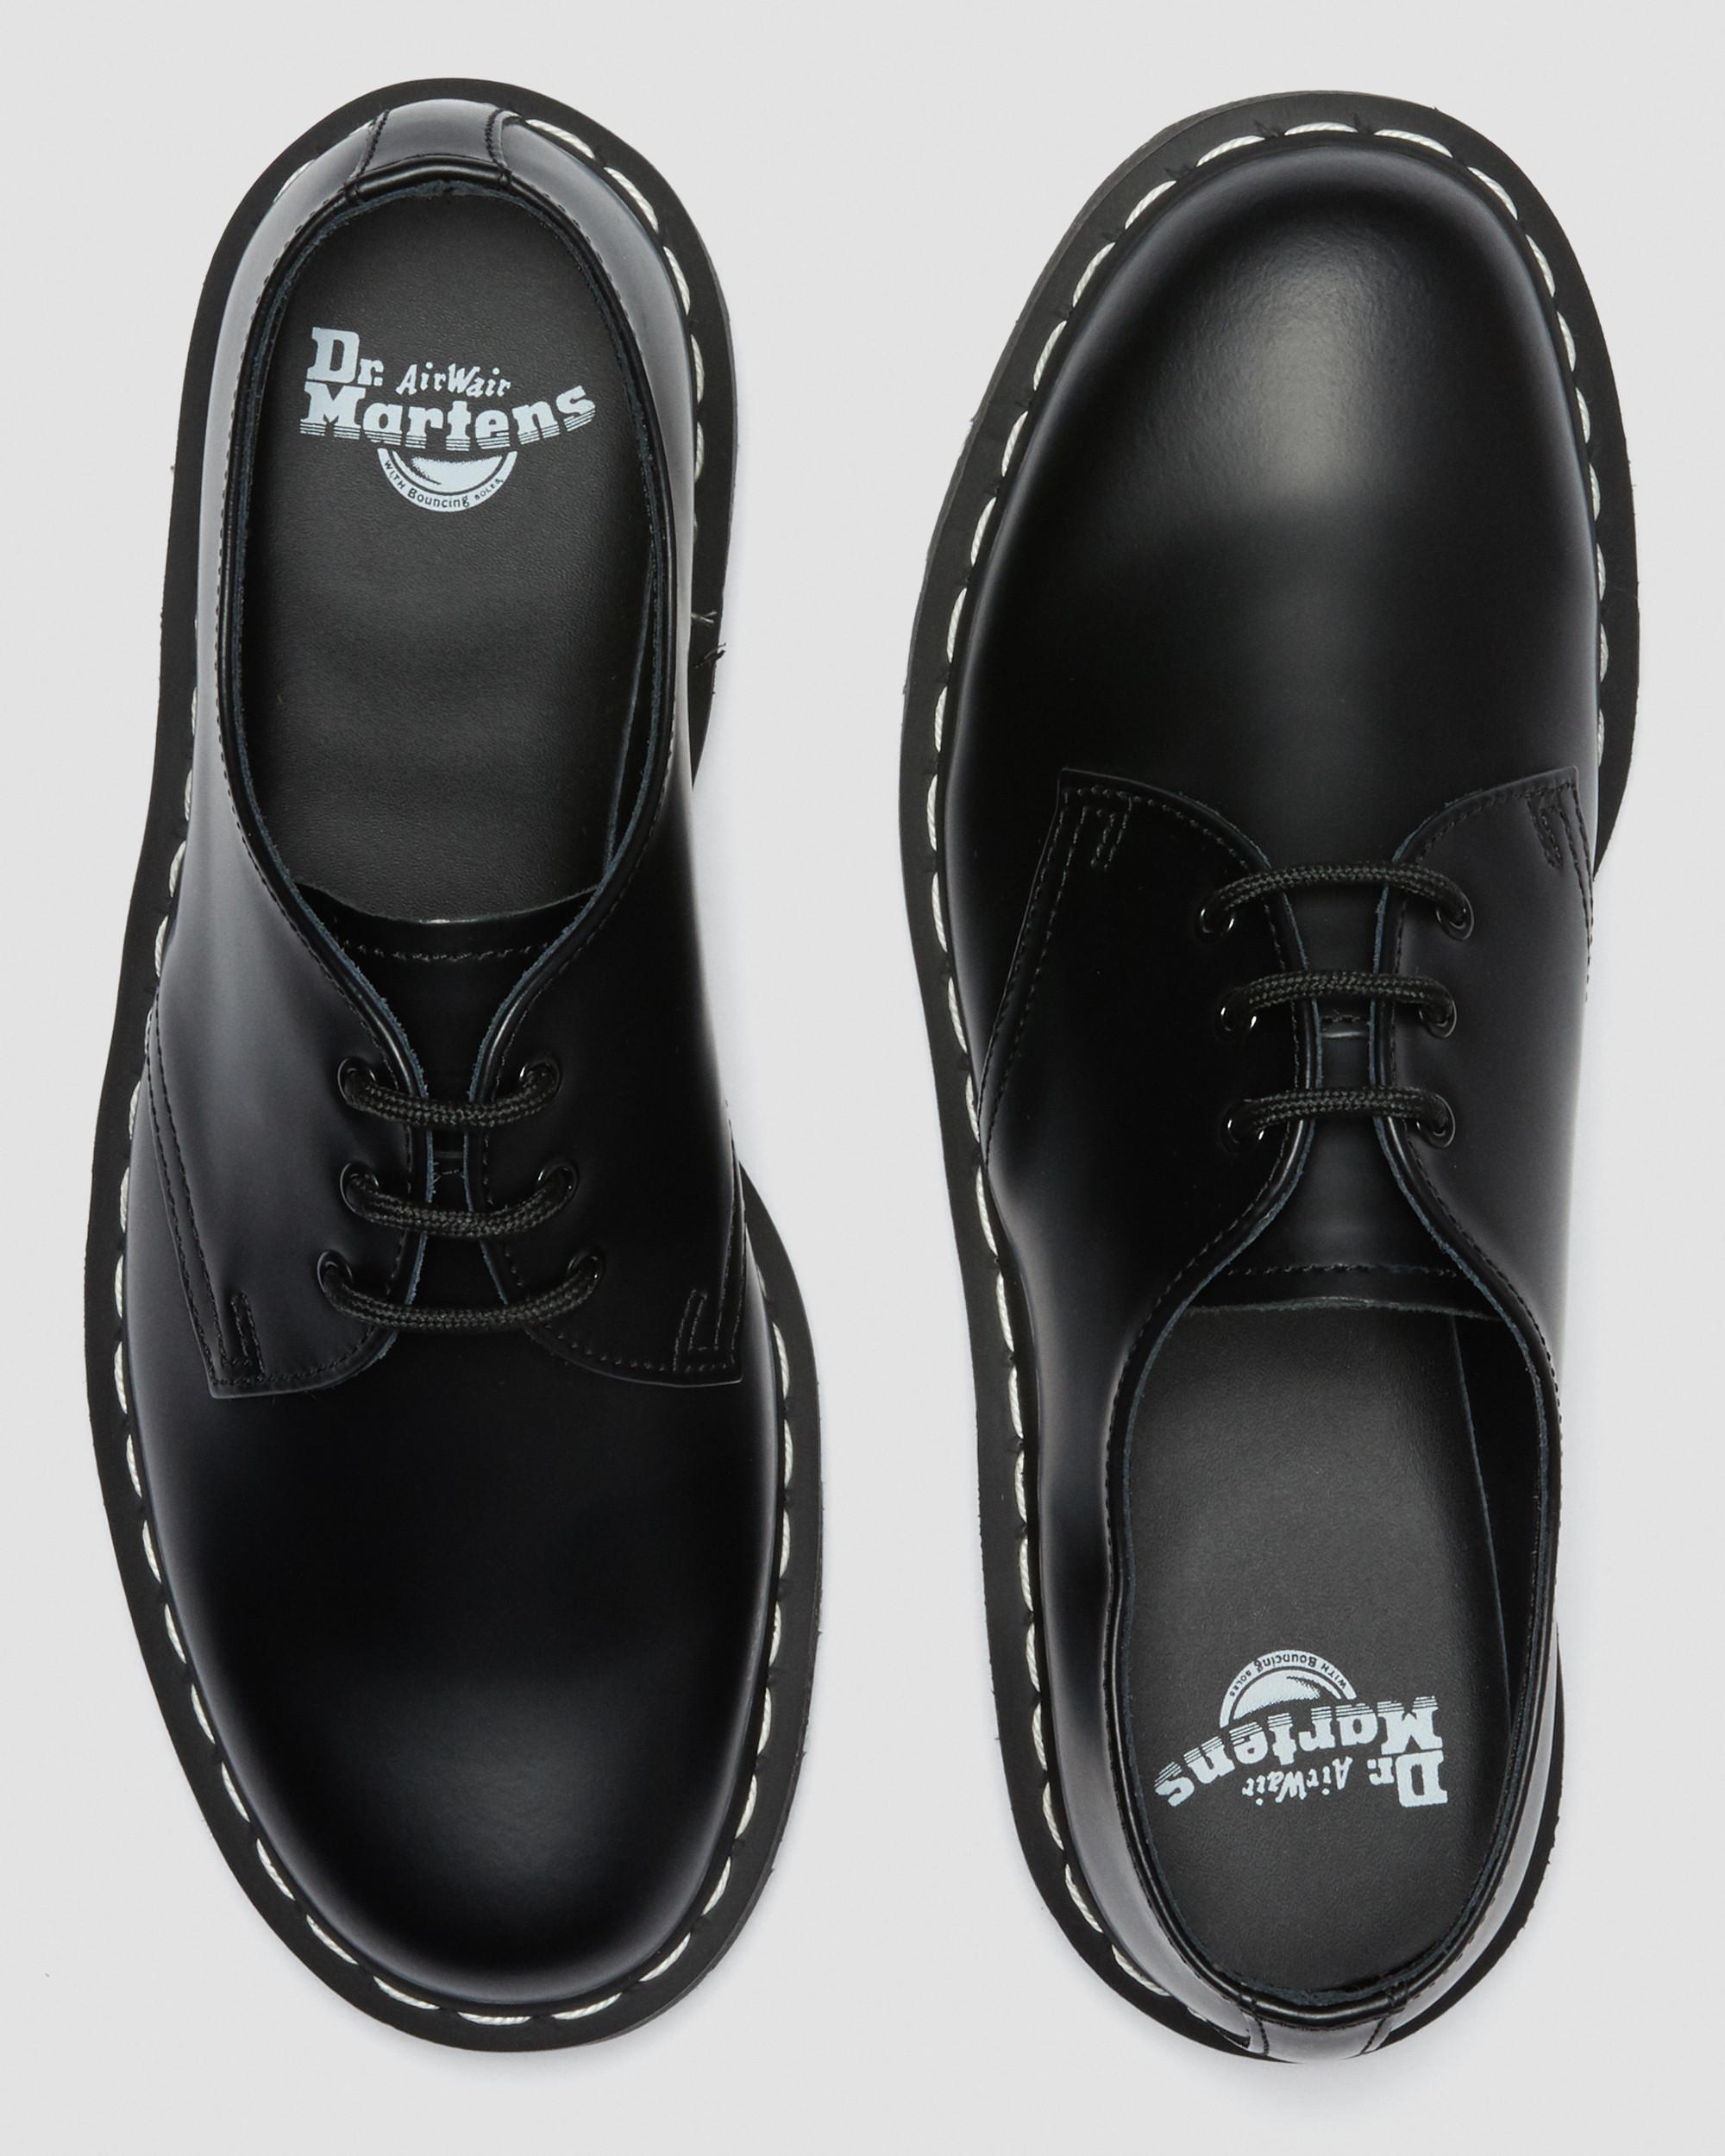 1461 WHITE STITCH LEATHER SHOES | Dr. Martens